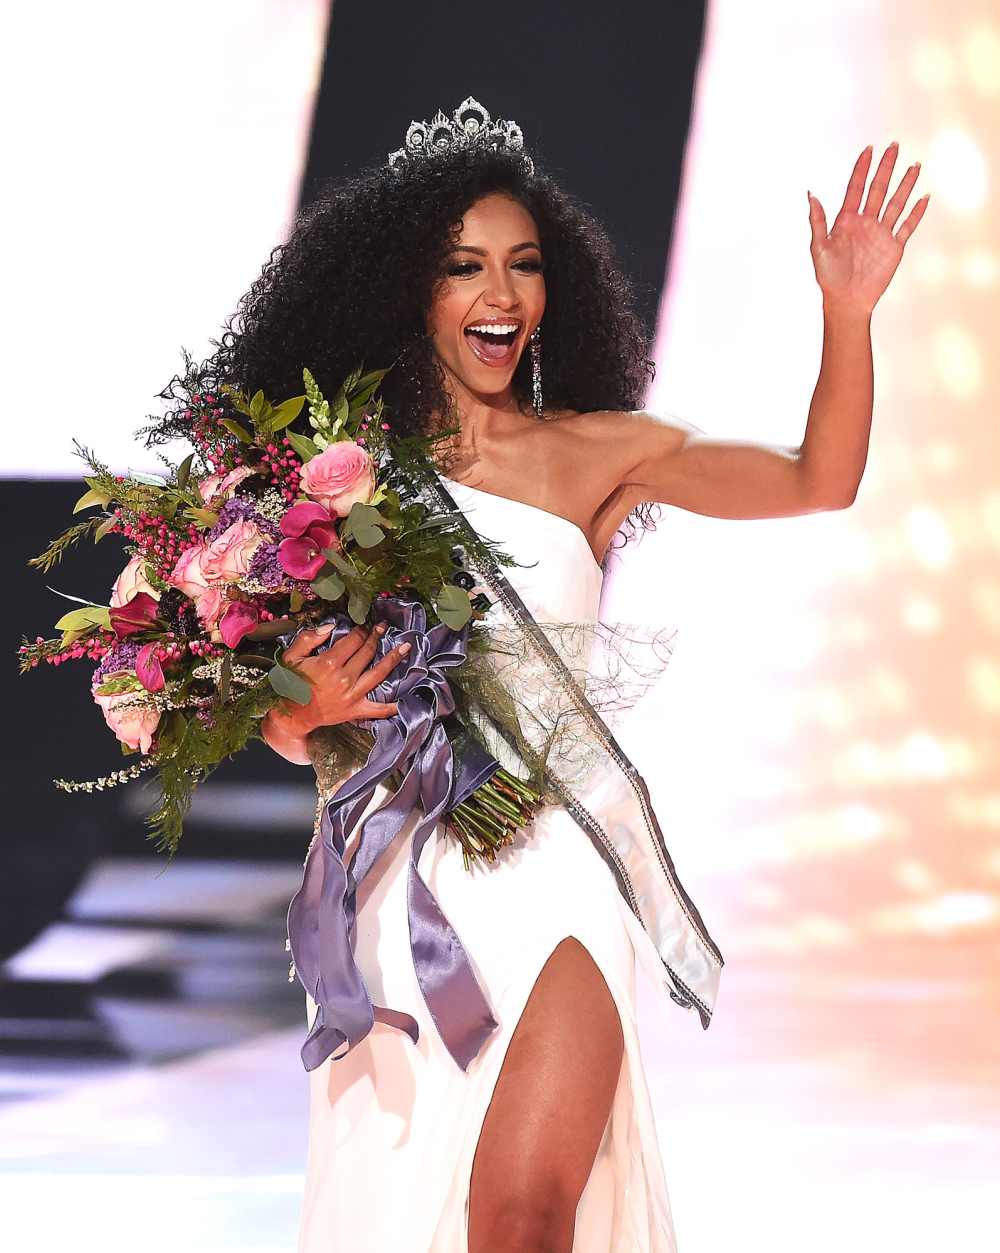 5 Things to Know About Miss USA's 2019 Winner North Carolina's Cheslie Kryst